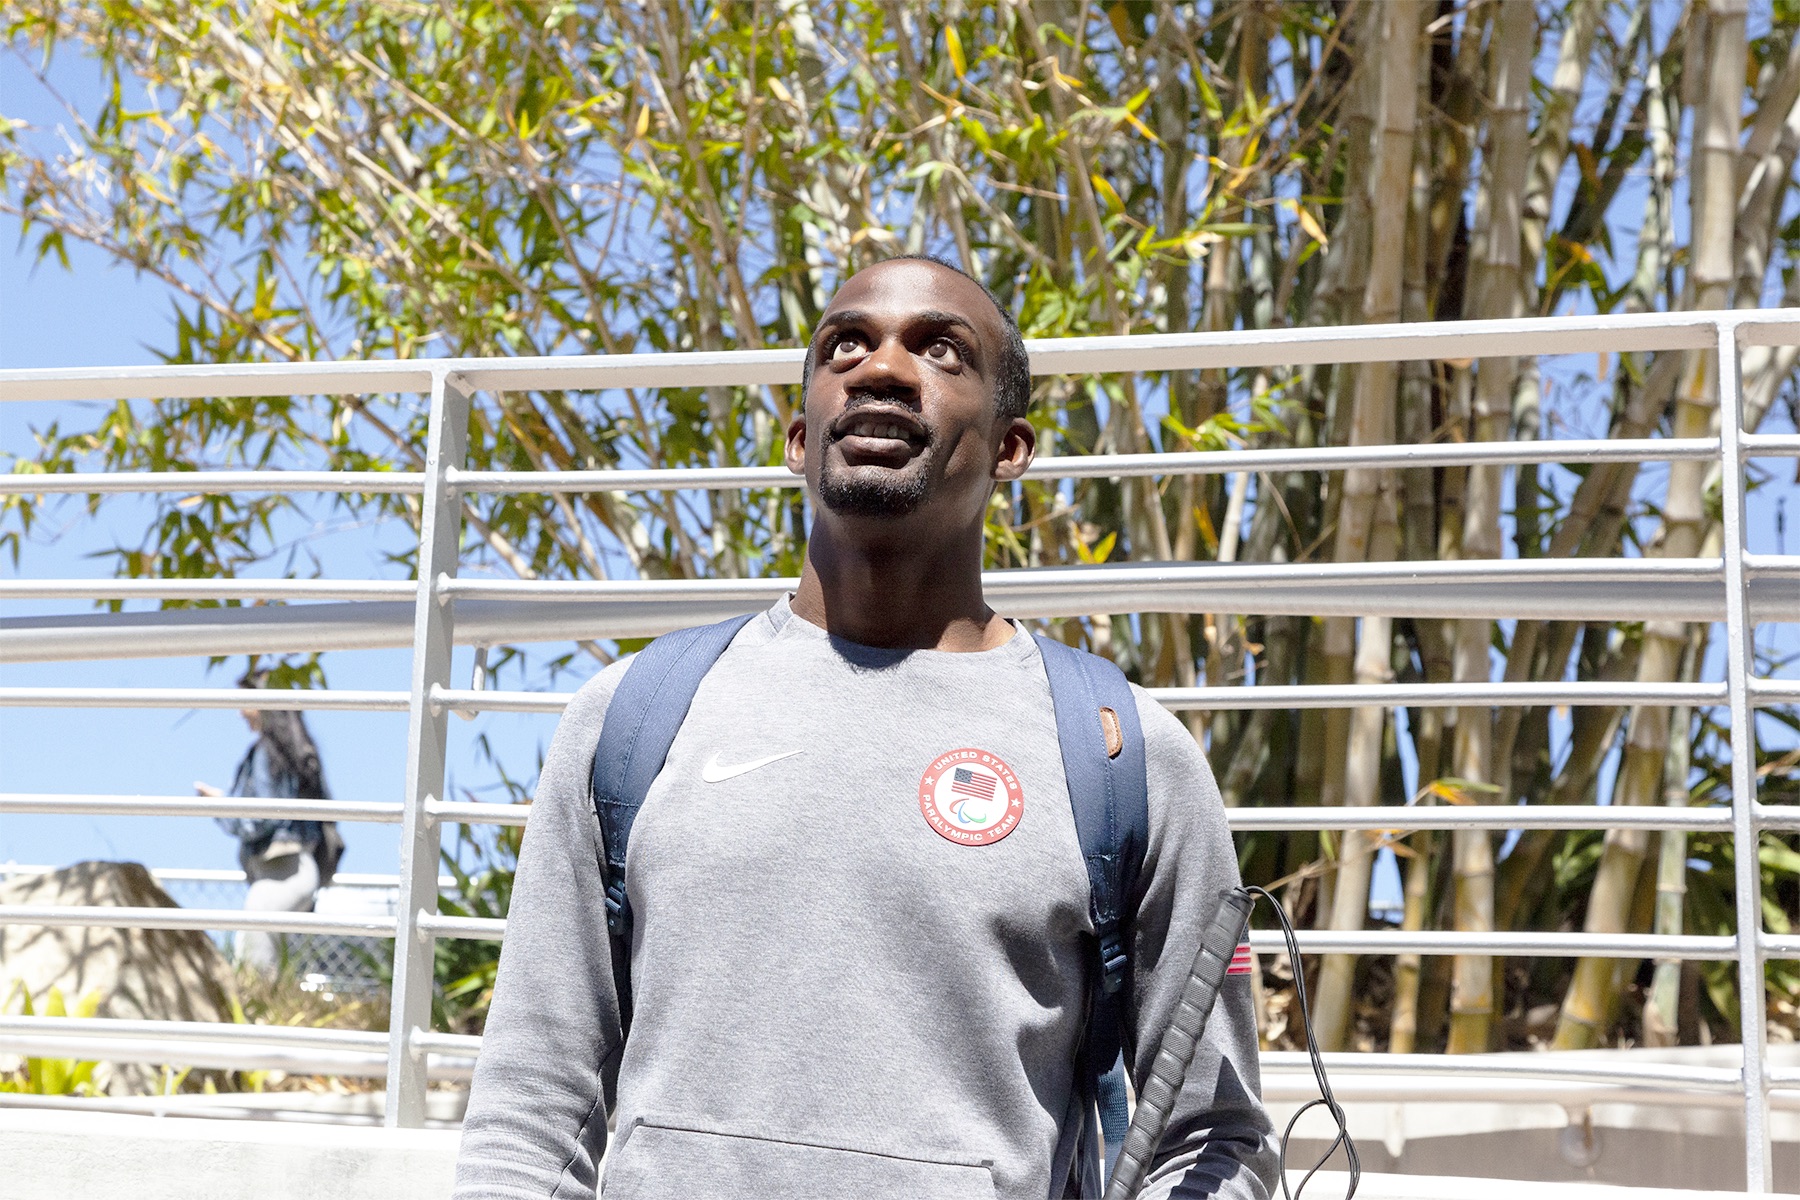 Lex Gillette, Paralympic gold medalist, visited Palomar College to encourage and inspire students to set their sights high. Photo by Mariesa Randow/The Telescope.